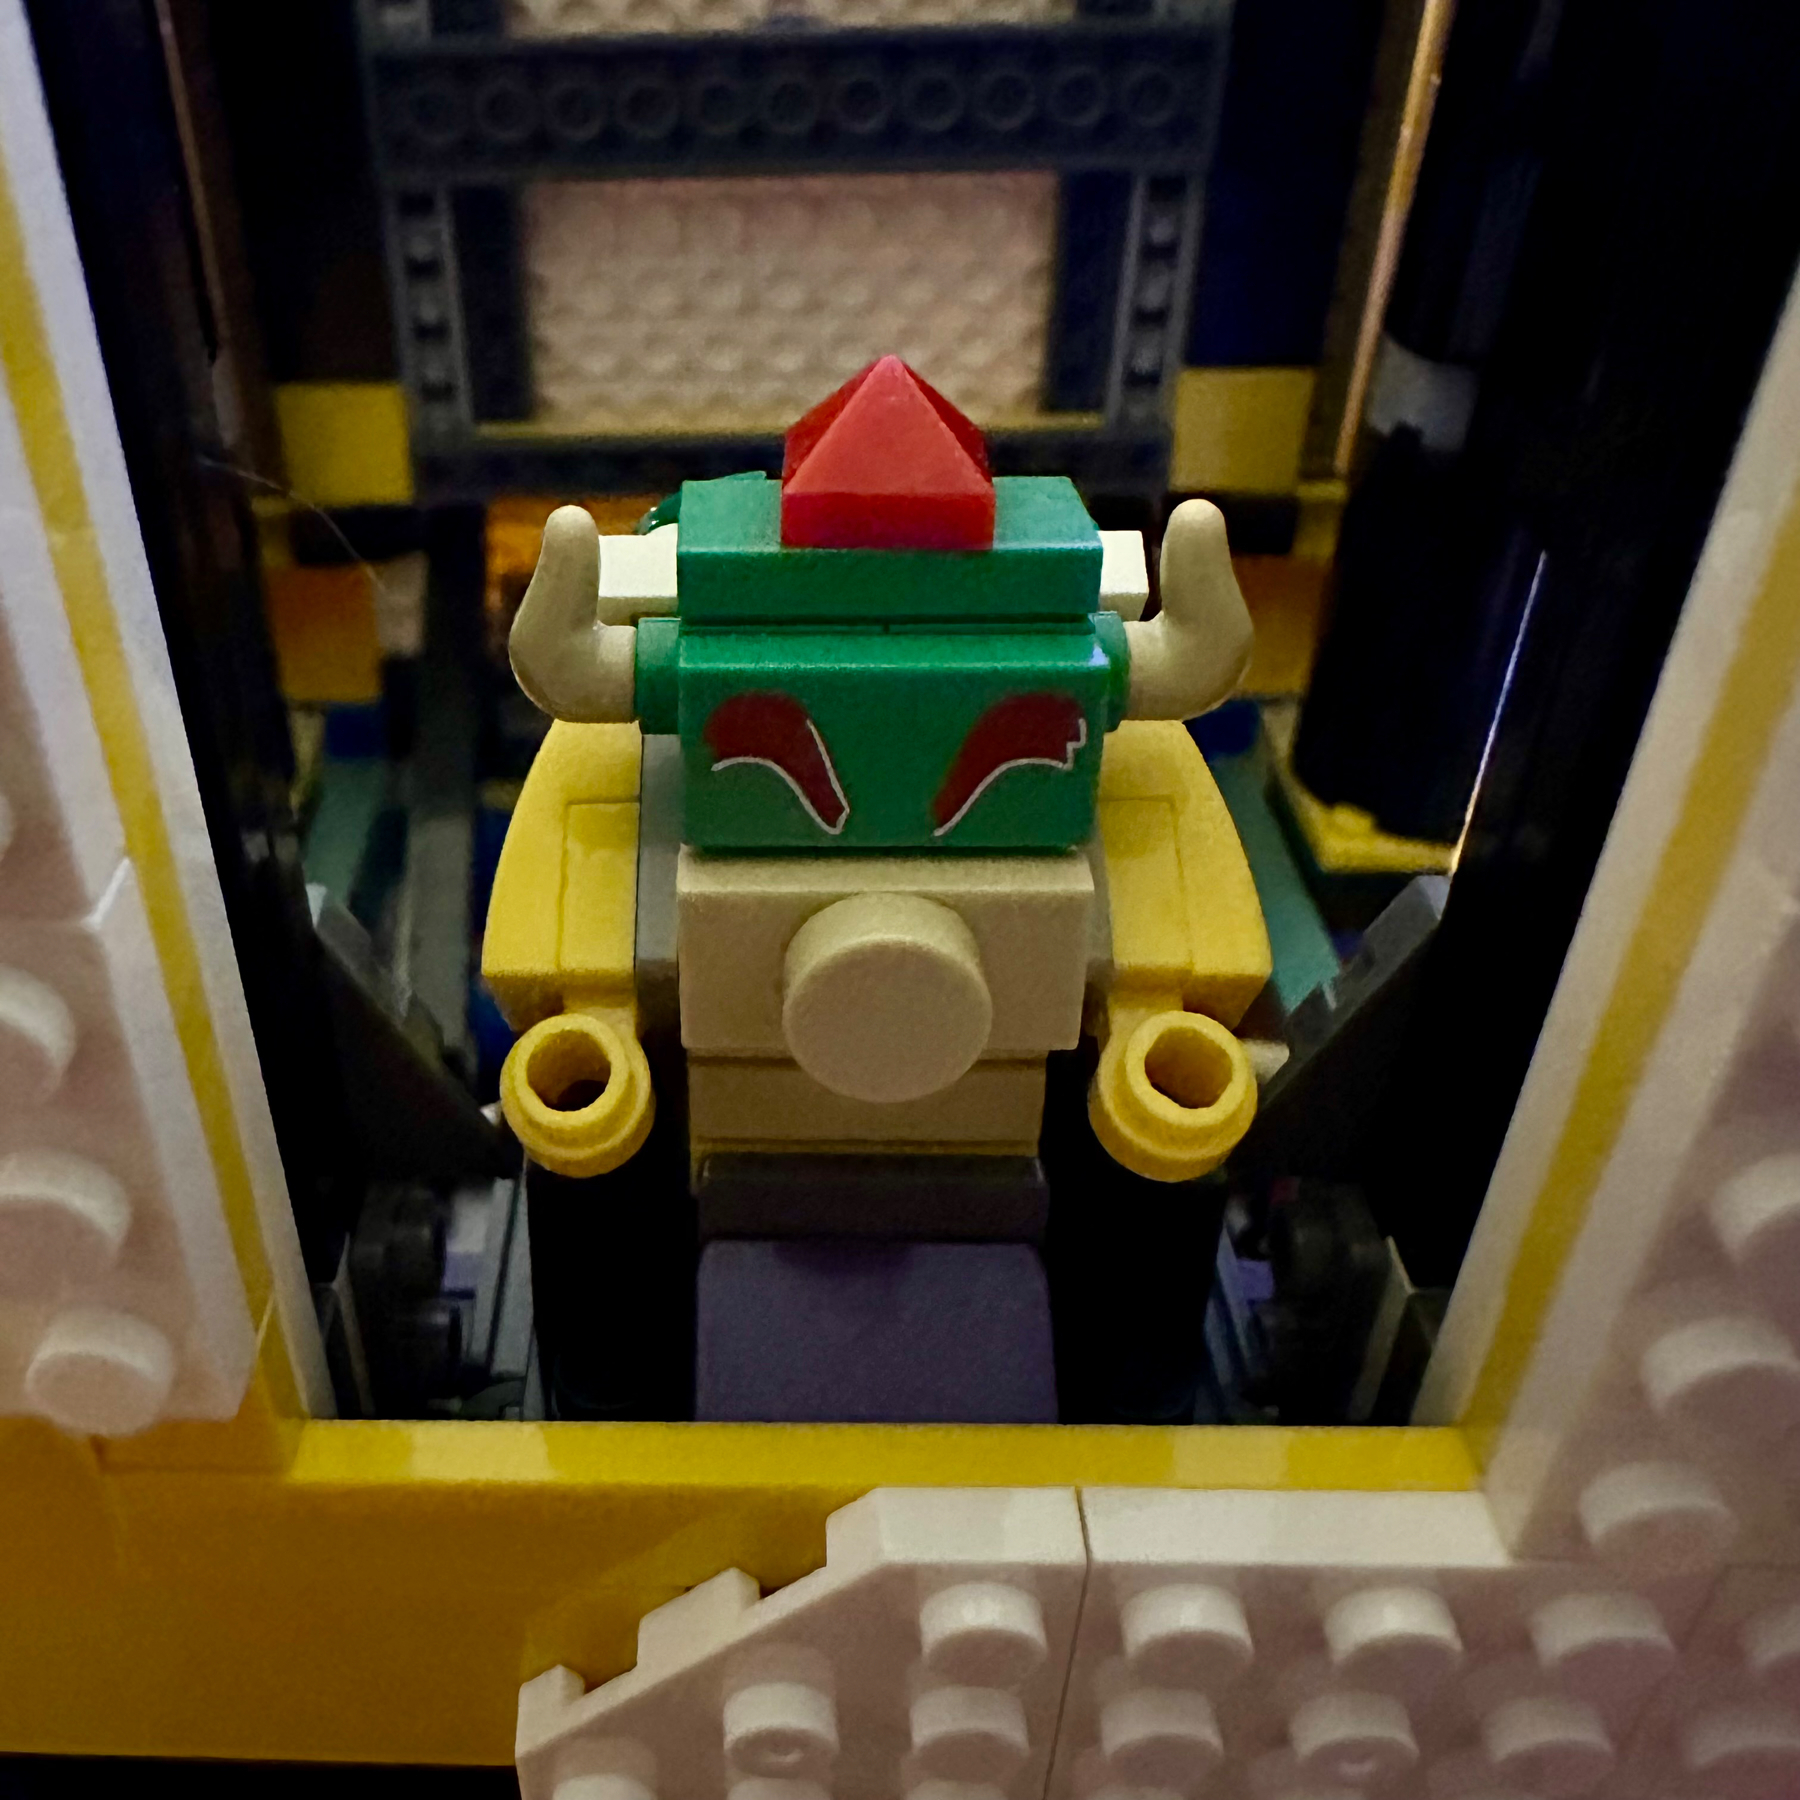 A close-up photo of a LEGO figure with horns and a red jewel on its head, resembling a character or deity, set within a blocky interior structure.